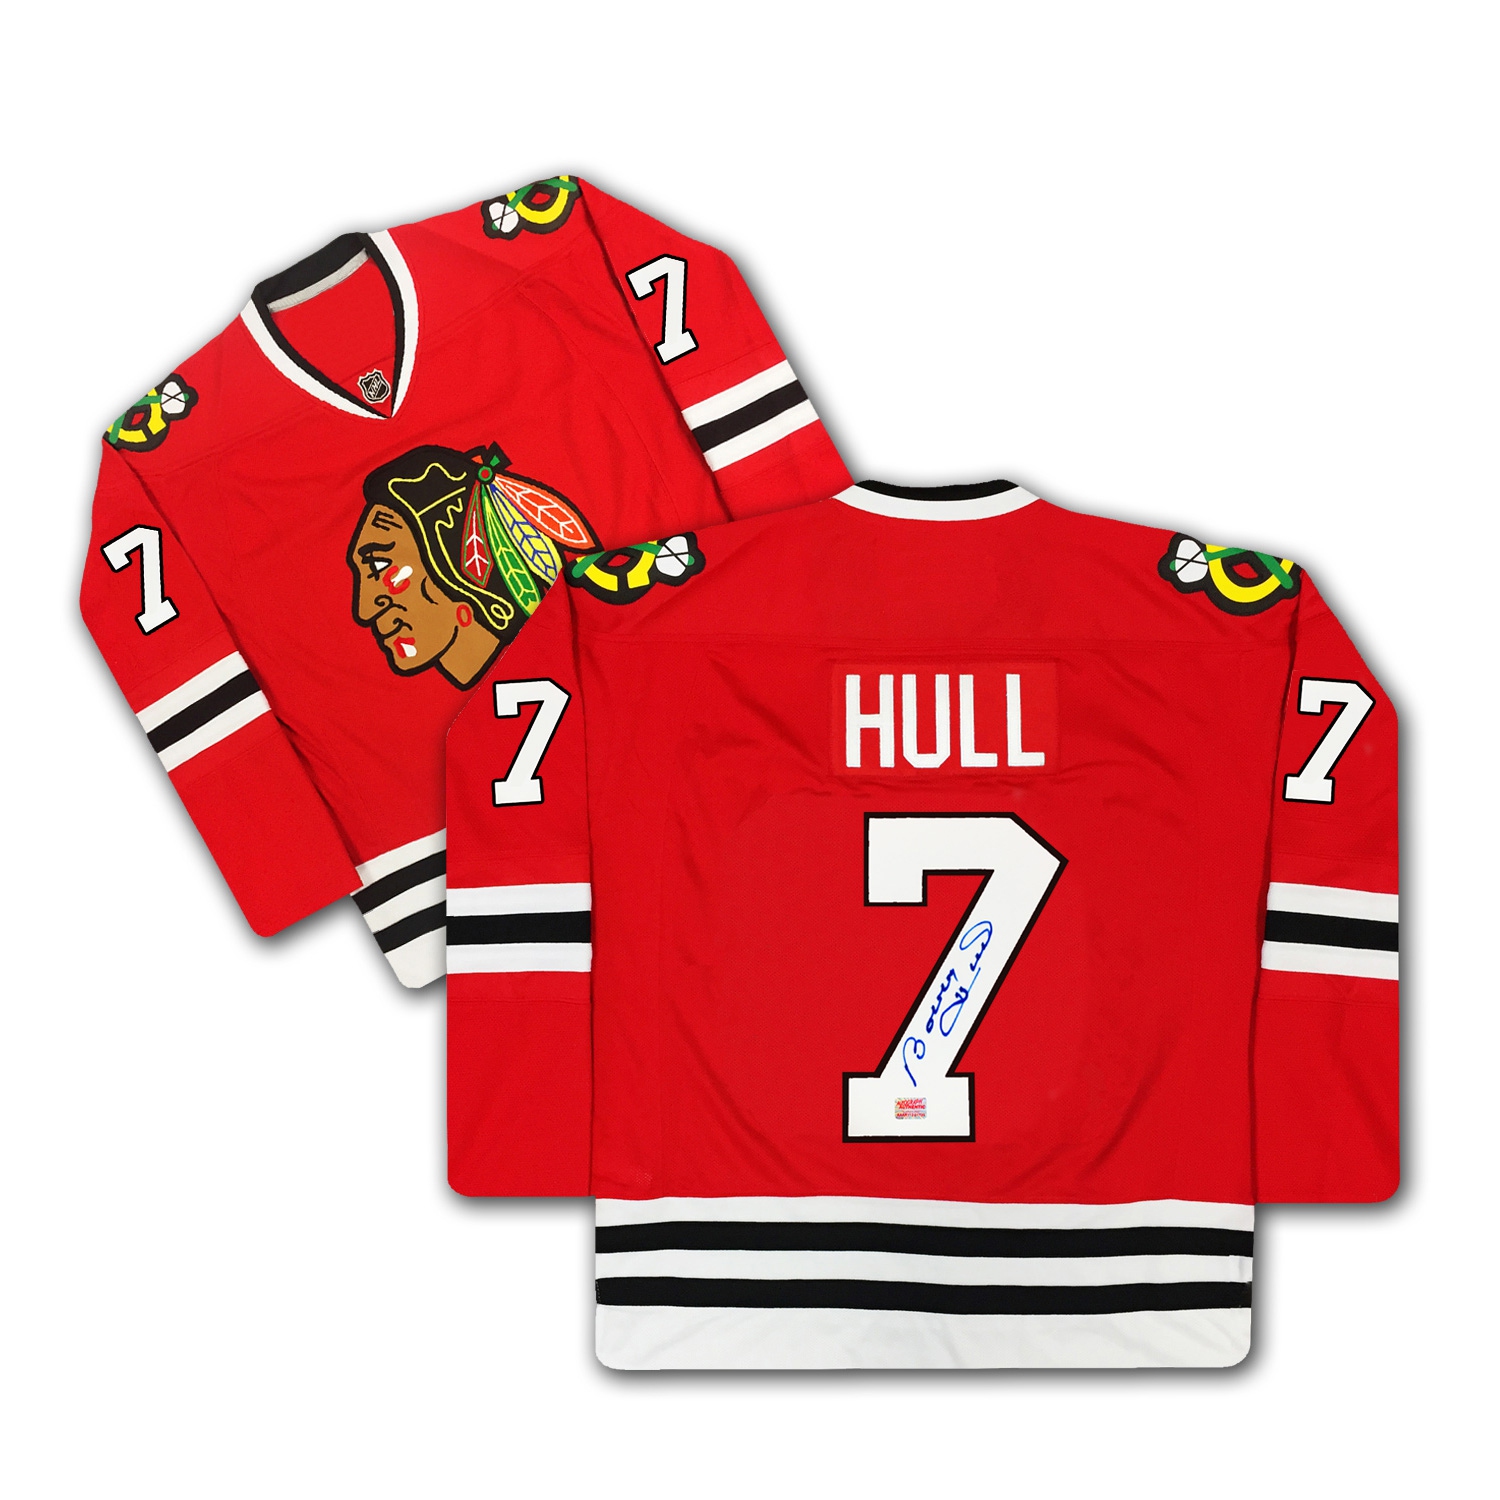 Bobby Hull Number 7 Signed Red Chicago Blackhawks Jersey